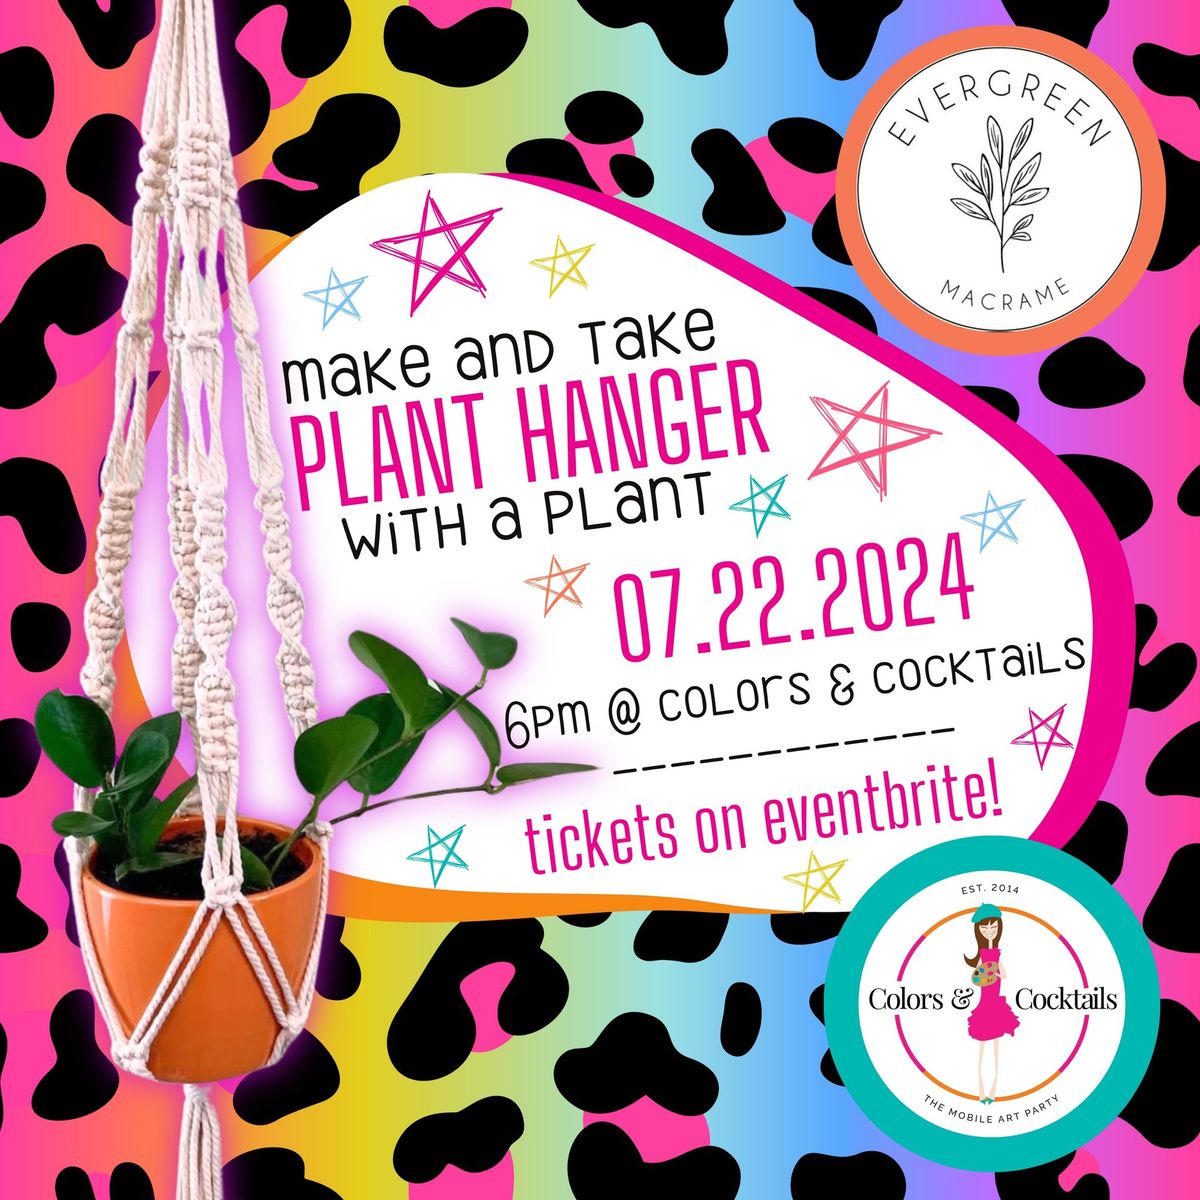 Make and Take Plant Hanger with a Plant!